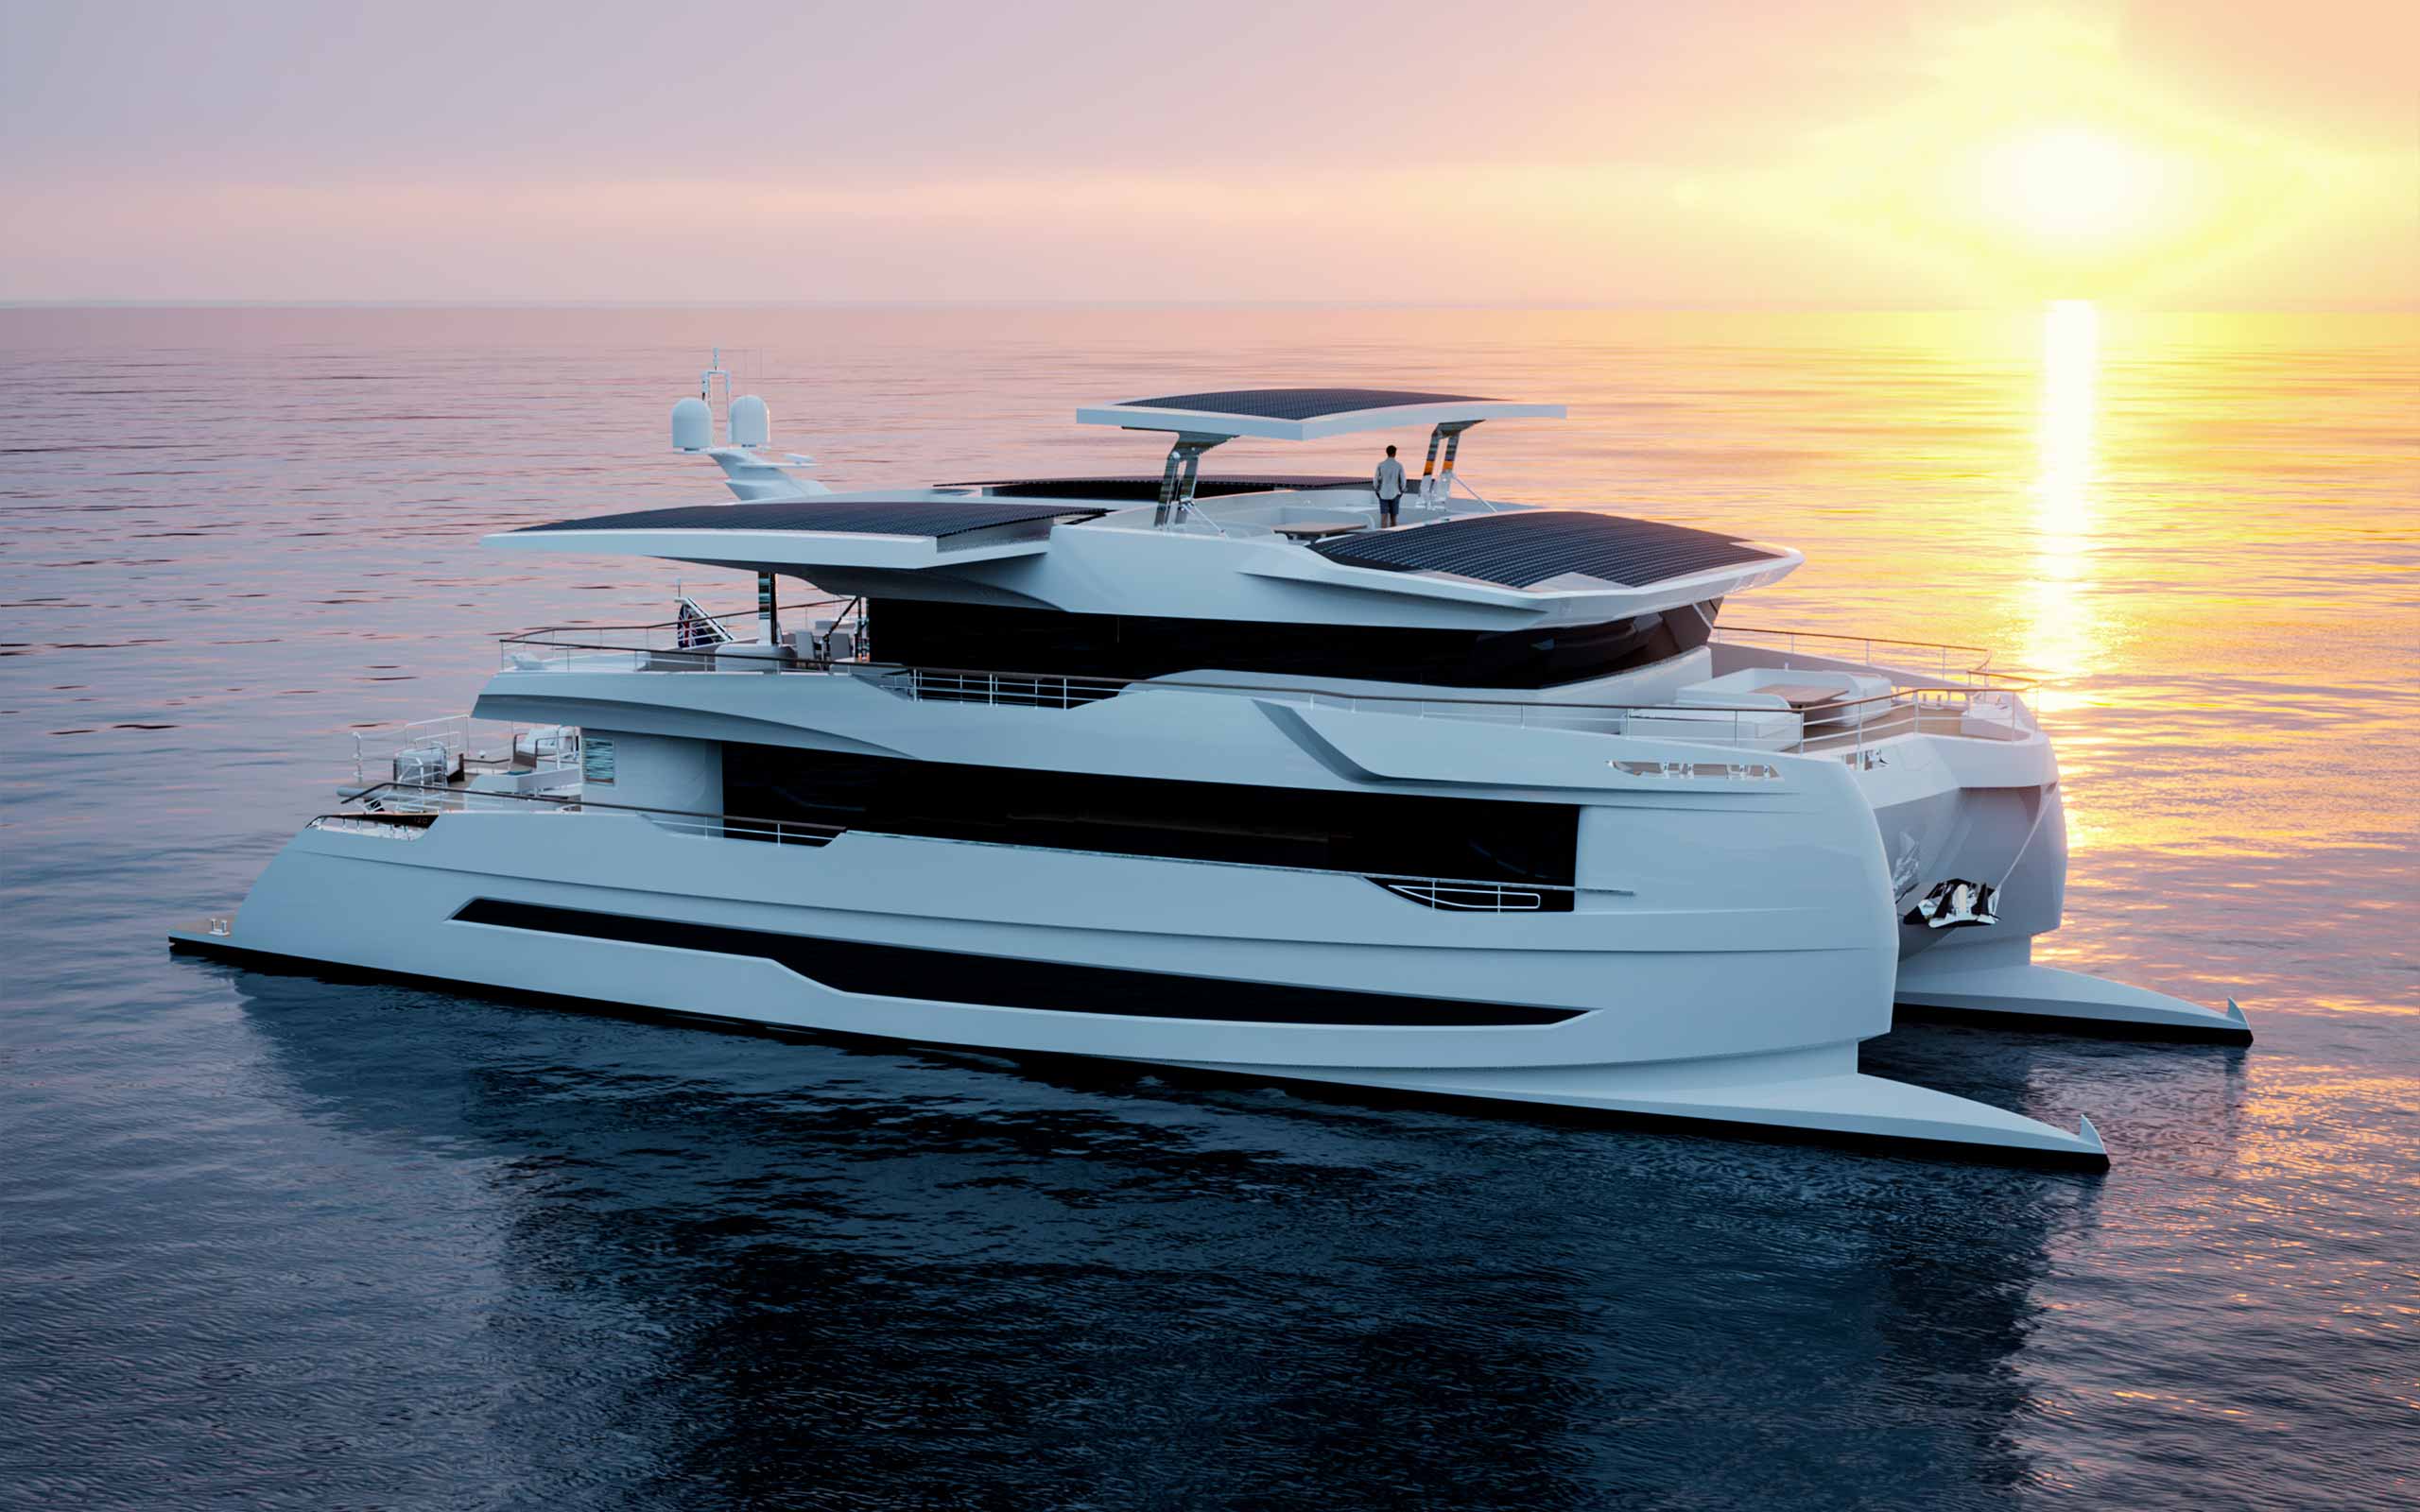 120 feet luxury yacht with solar panels on the roof